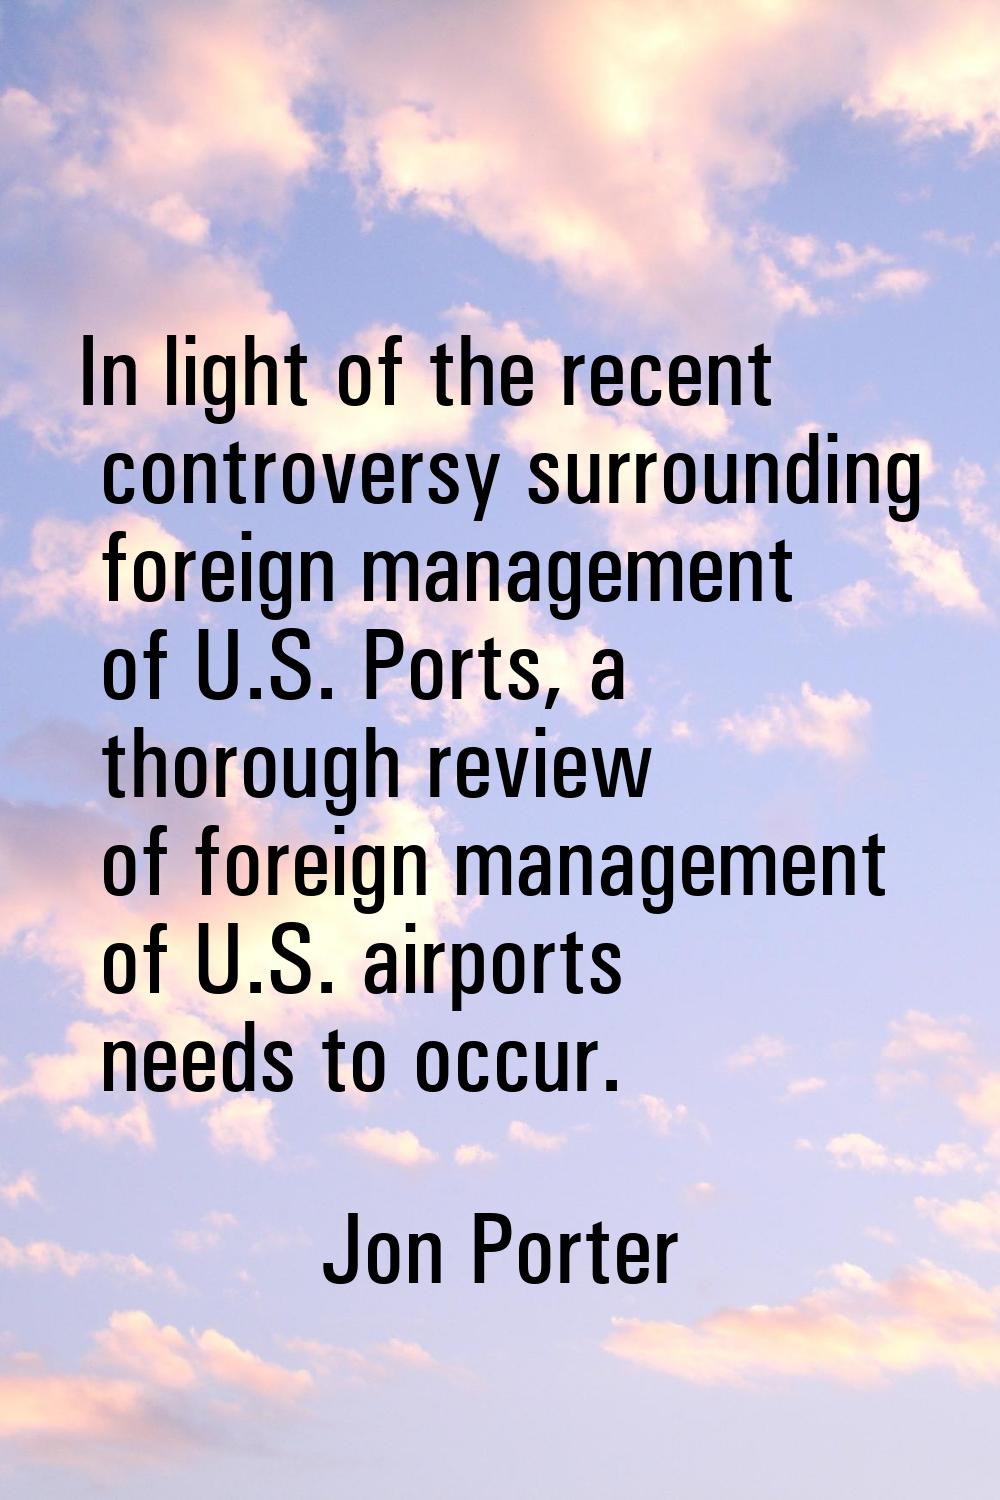 In light of the recent controversy surrounding foreign management of U.S. Ports, a thorough review 